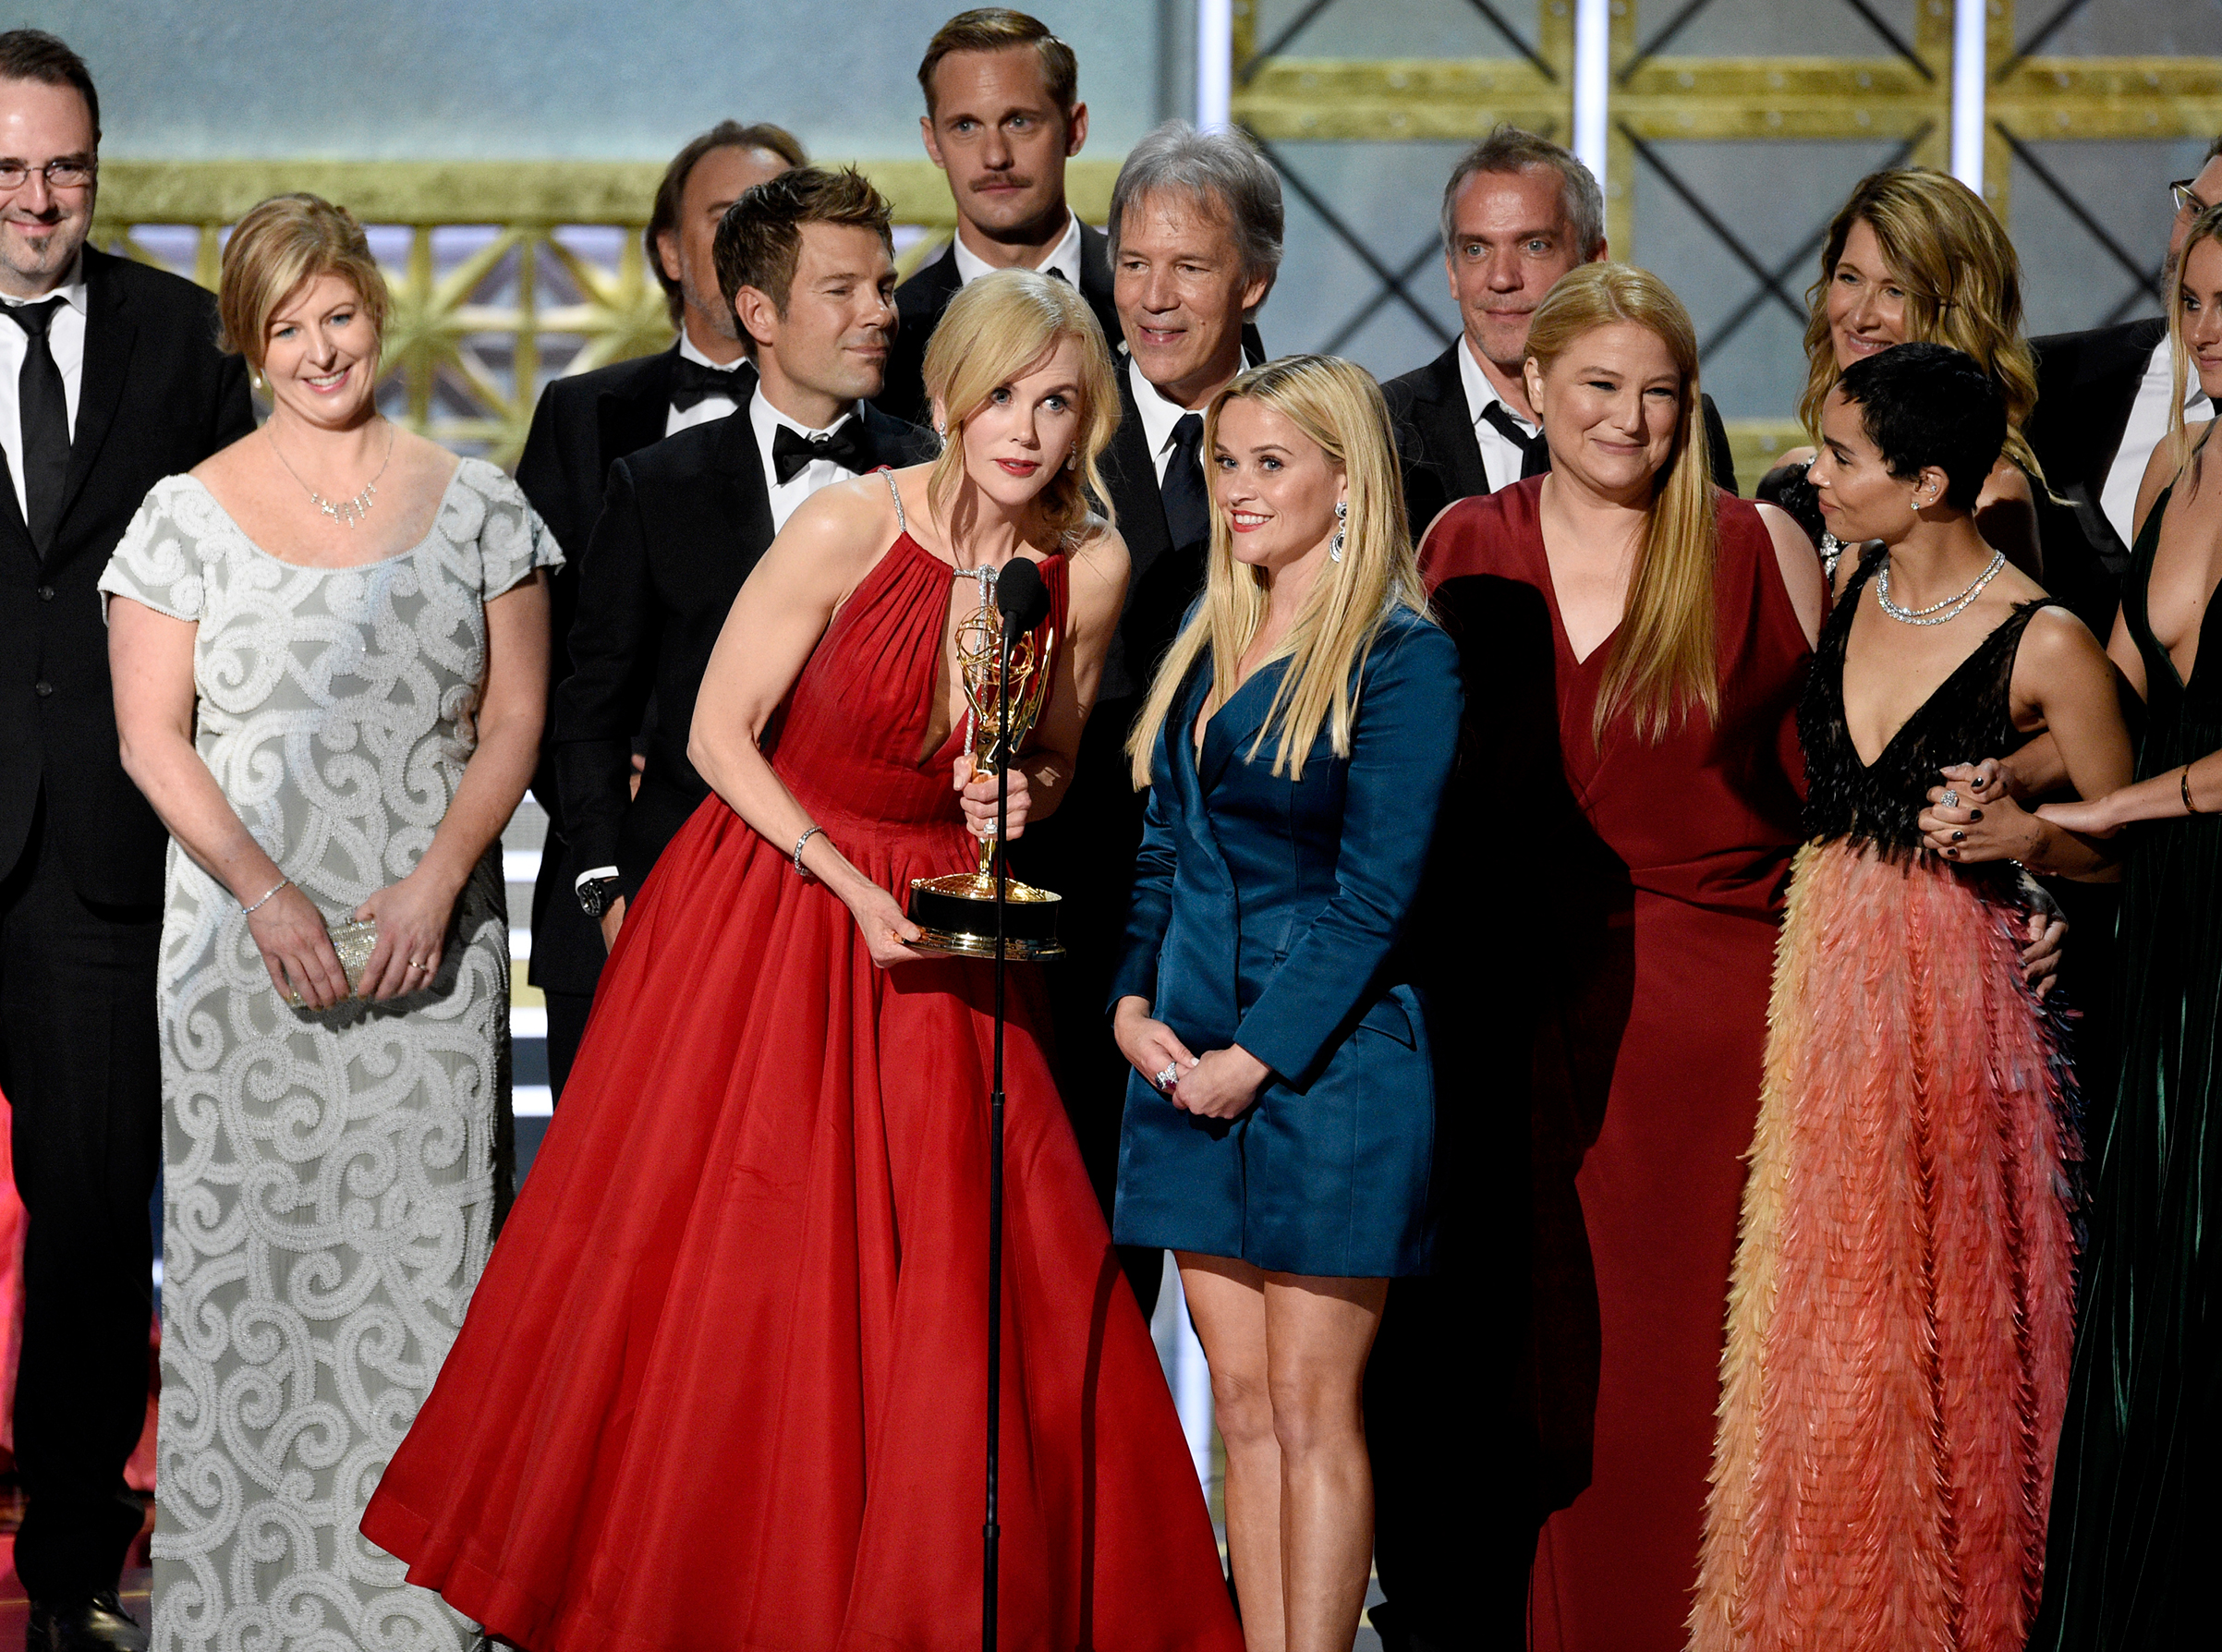 Nicole Kidman, center left, Reese Witherspoon, center right, and cast and crew accept the award for outstanding limited series for "Big Little Lies" at the 69th Primetime Emmy Awards on Sept. 17, 2017, at the Microsoft Theater in Los Angeles. (Chris Pizzello—Invision/AP)